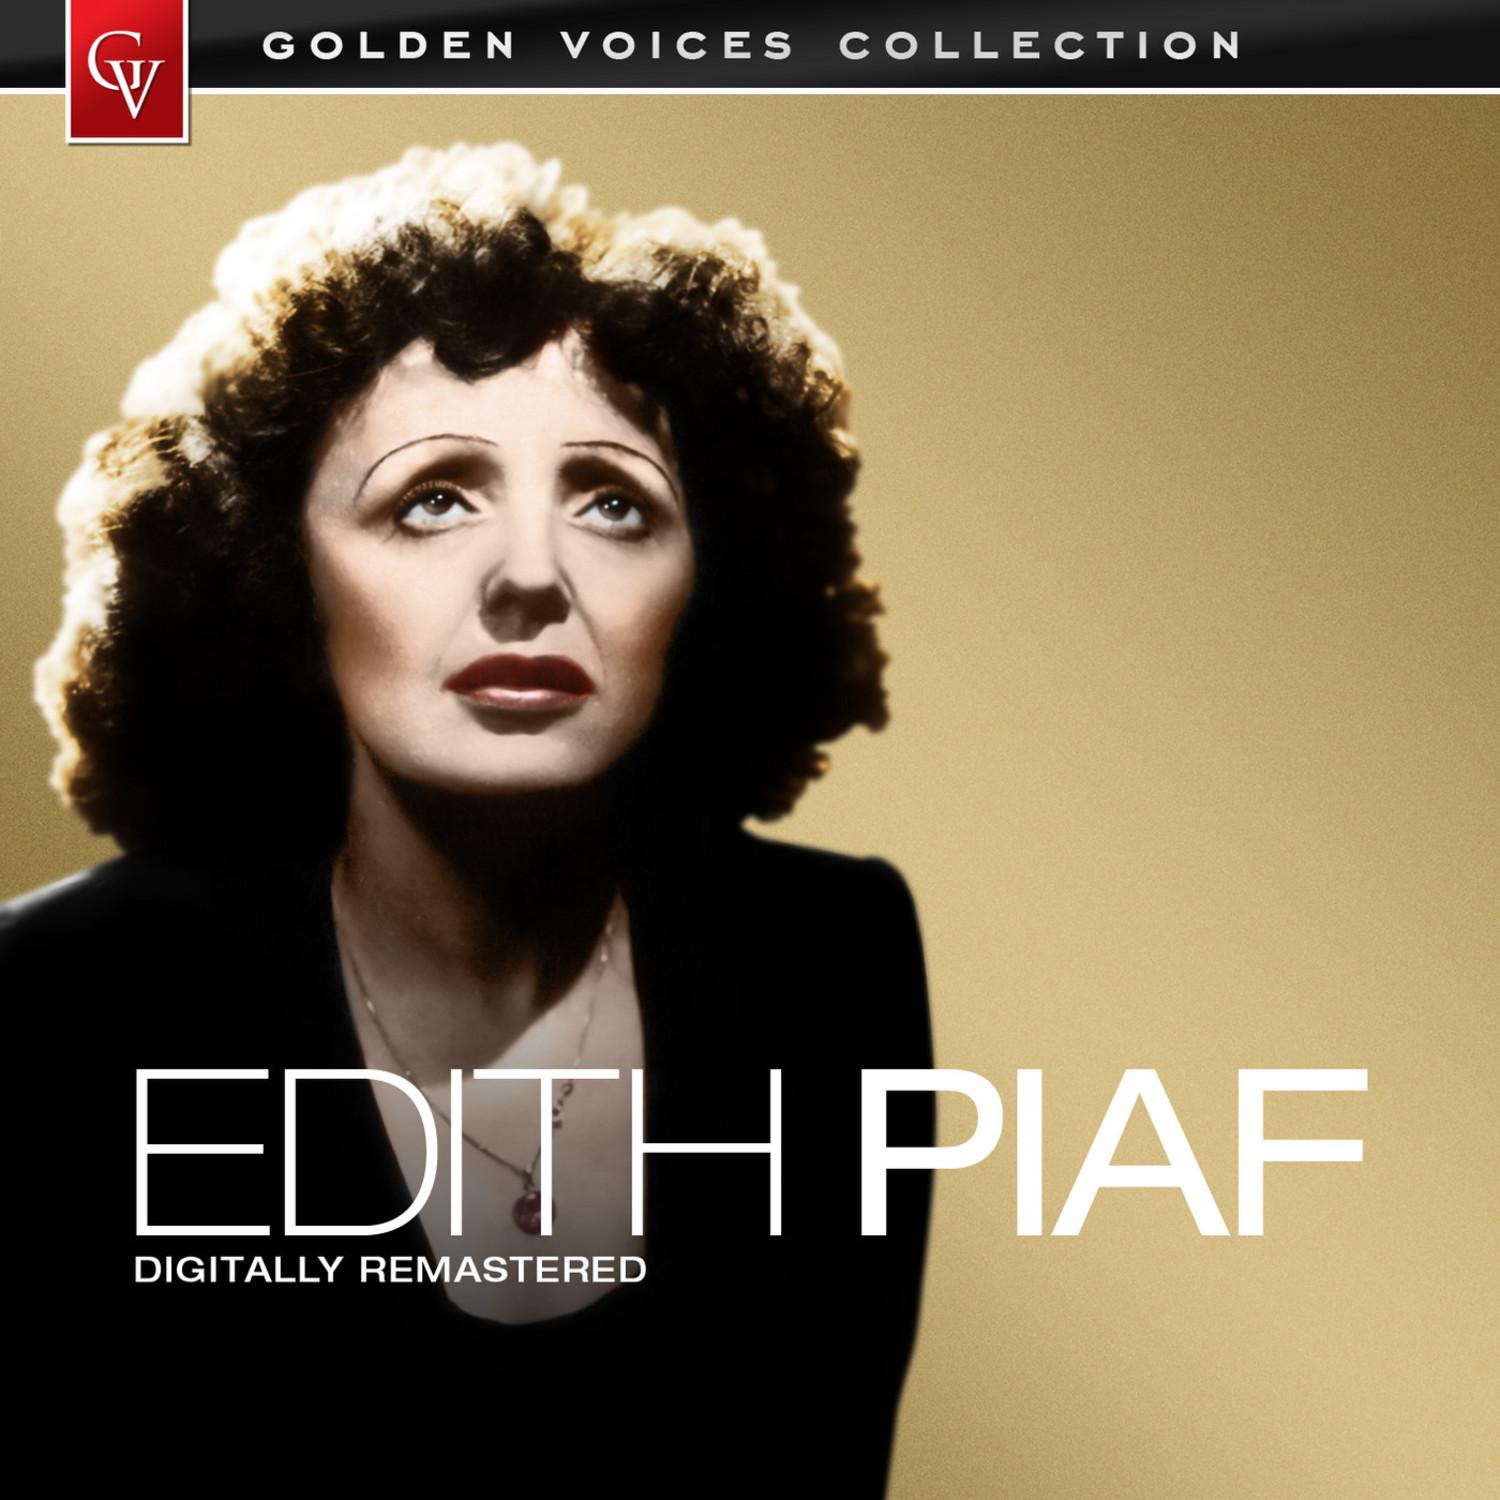 Golden Voices - Edith Piaf (Remastered)